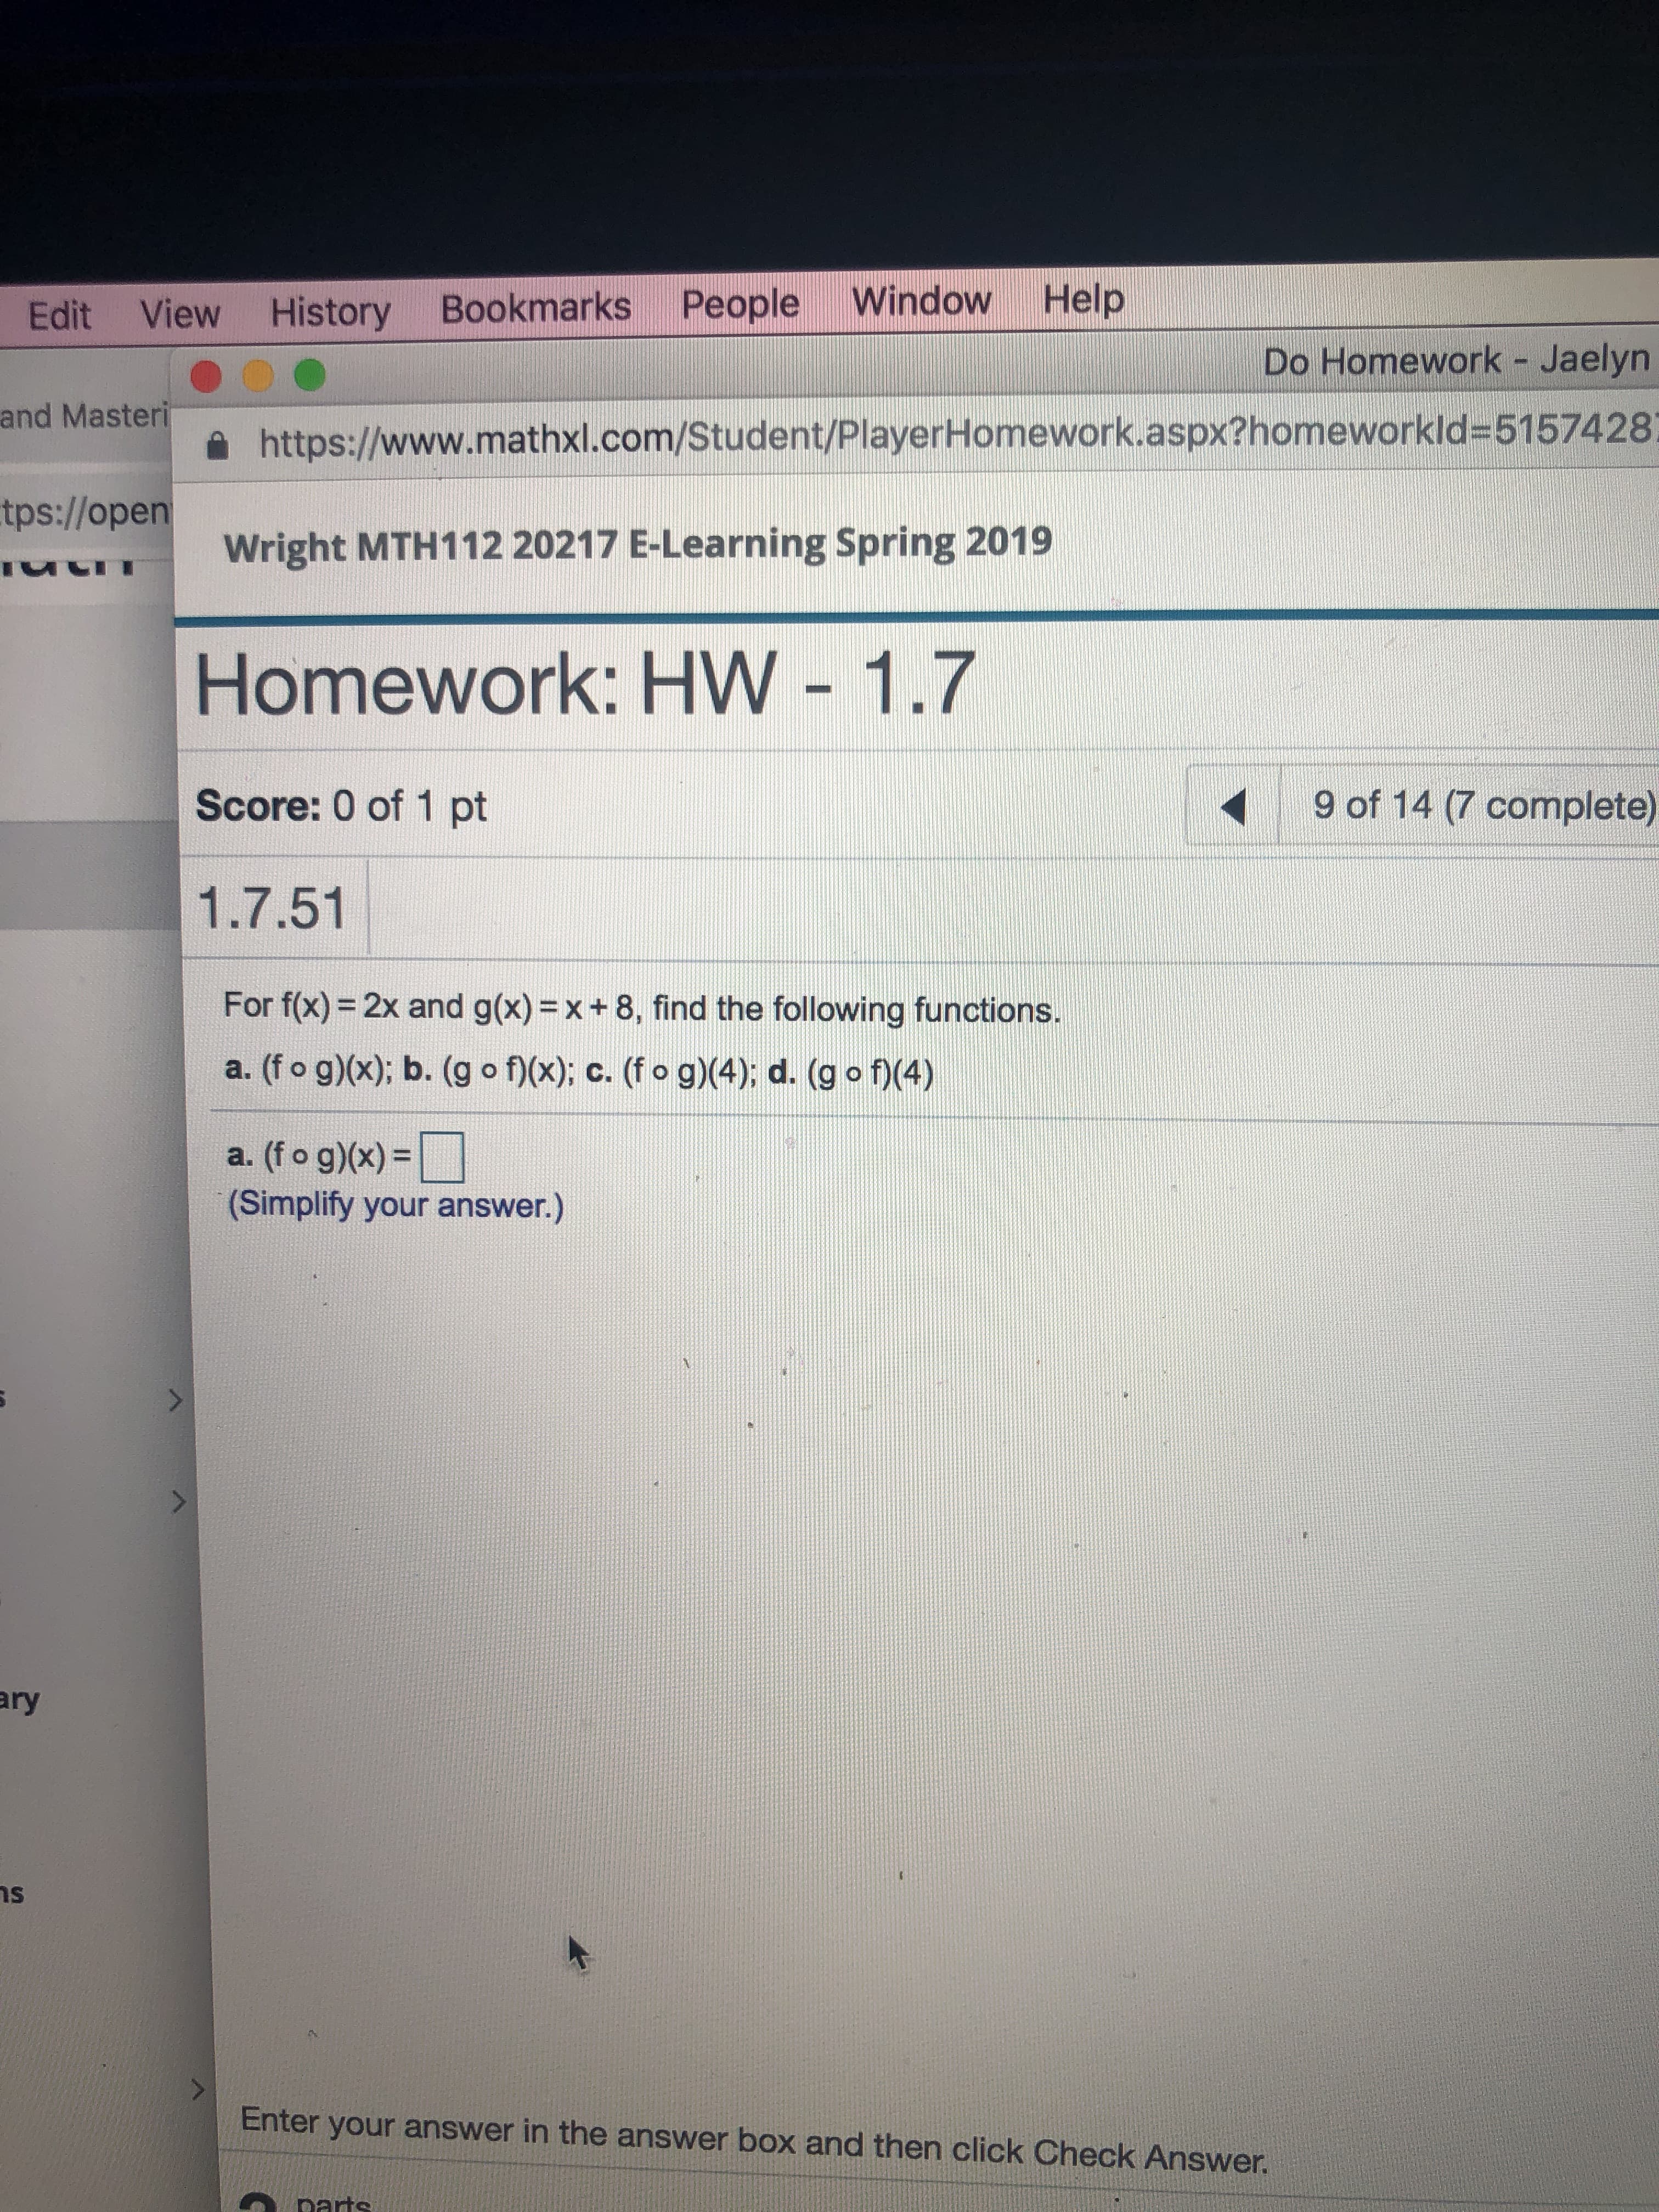 Edit View History Bookmarks People Window Help
Do Homework - Jaelyn
https://www.mathxl.com/Student/PlayerHomework.aspx?homeworkId=5157428
wright MTH 112 20217 E-Learning Spring 2019
Homework: HW - 1.7
Score: 0 of 1 pt
1.7.51
tps://open
uい·
9 of 14 (7 complete)
For f(x) = 2x and g(x)= x + 8, find the following functions.
a. (f o g)x); b. (g o f)(x), c. (f o g) 4); d. (g o1(4)
a(fo g))-
(Simplify your answer.)
ary
ns
Enter your answer in the answer box and then click Check Answer
